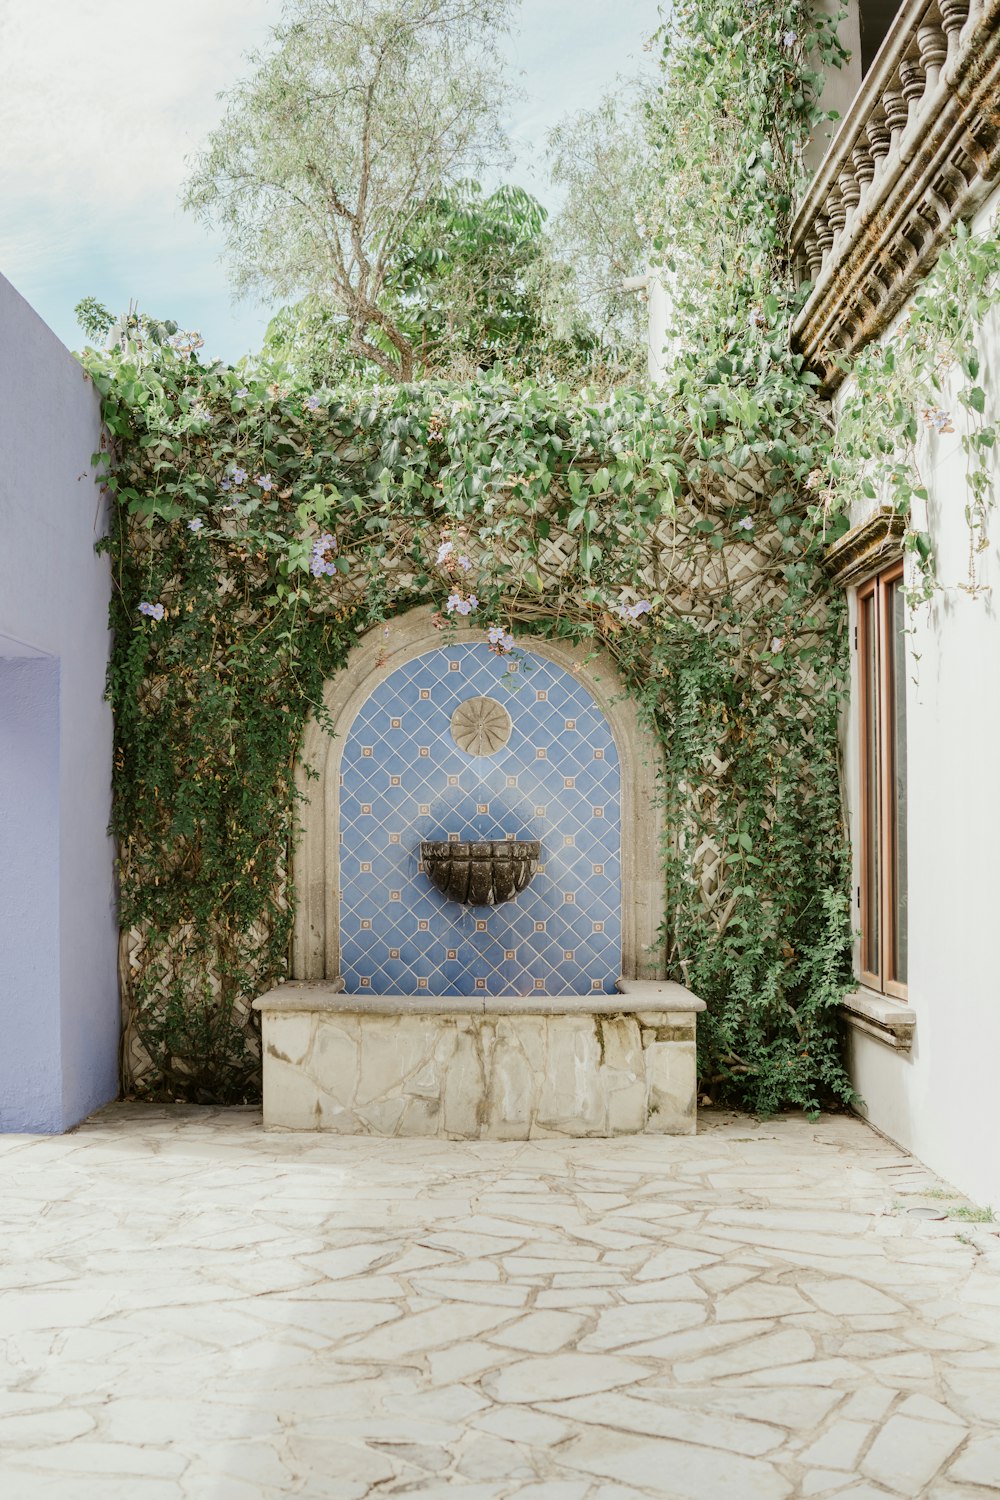 a fountain in the middle of a courtyard